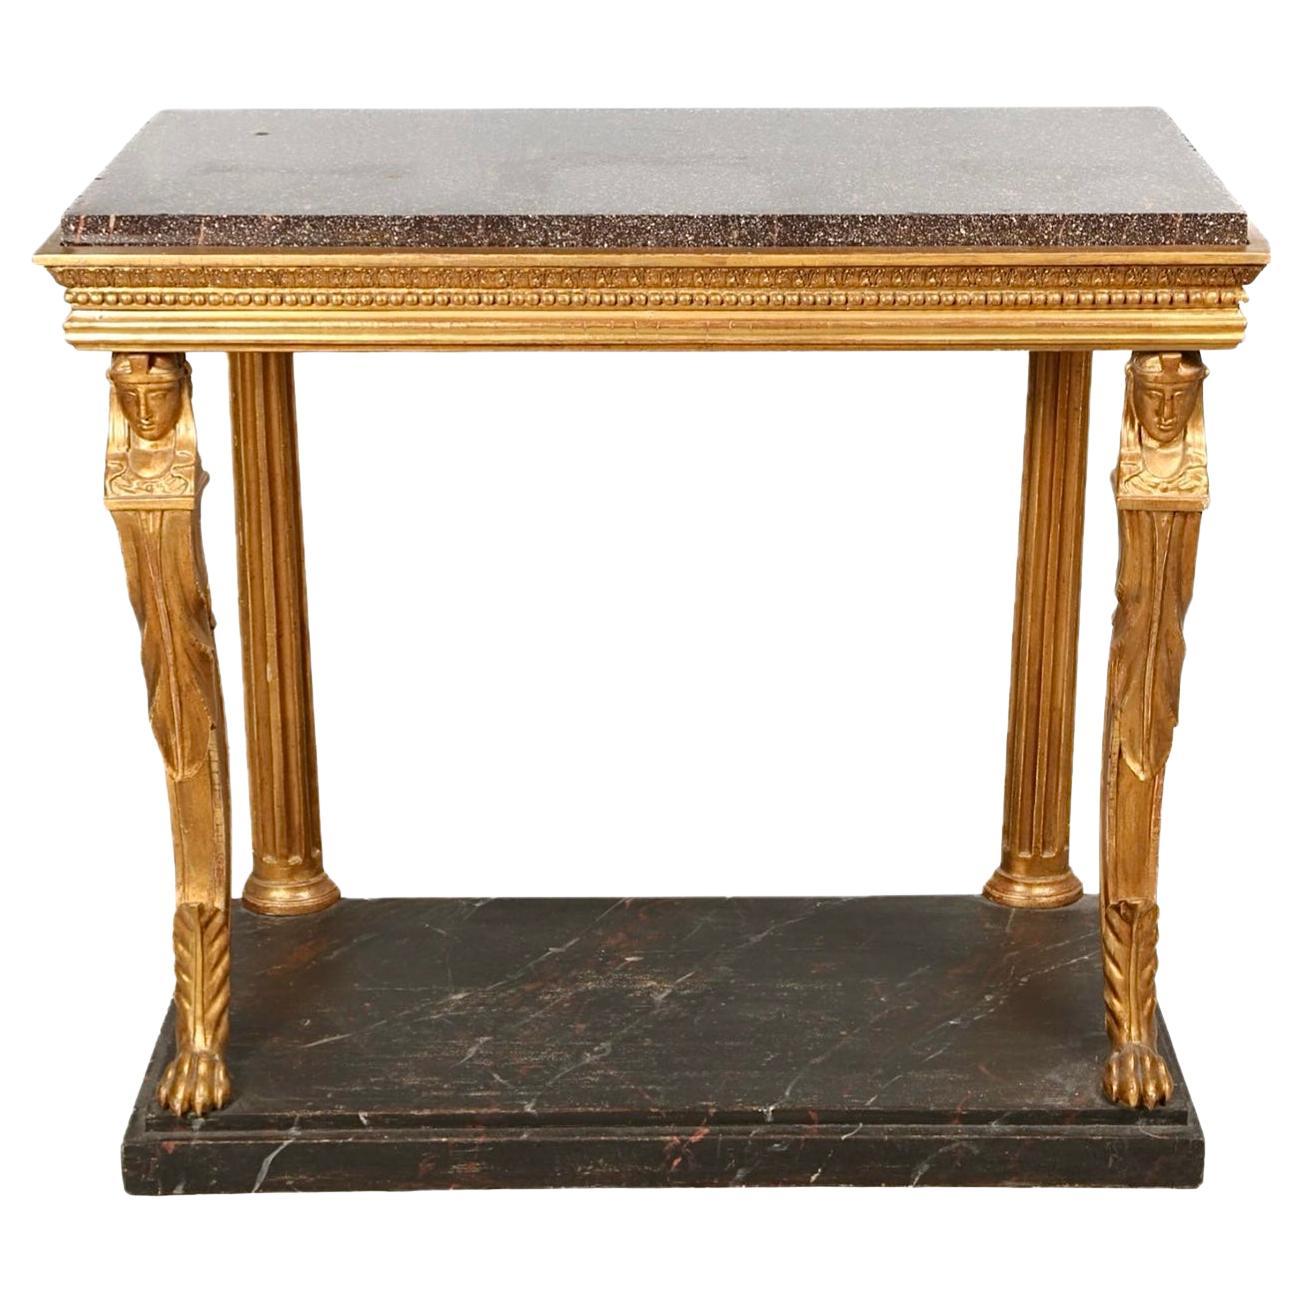 Swedish Neoclassical Giltwood Porphyry Top Console Table, Early 19th Century For Sale 9